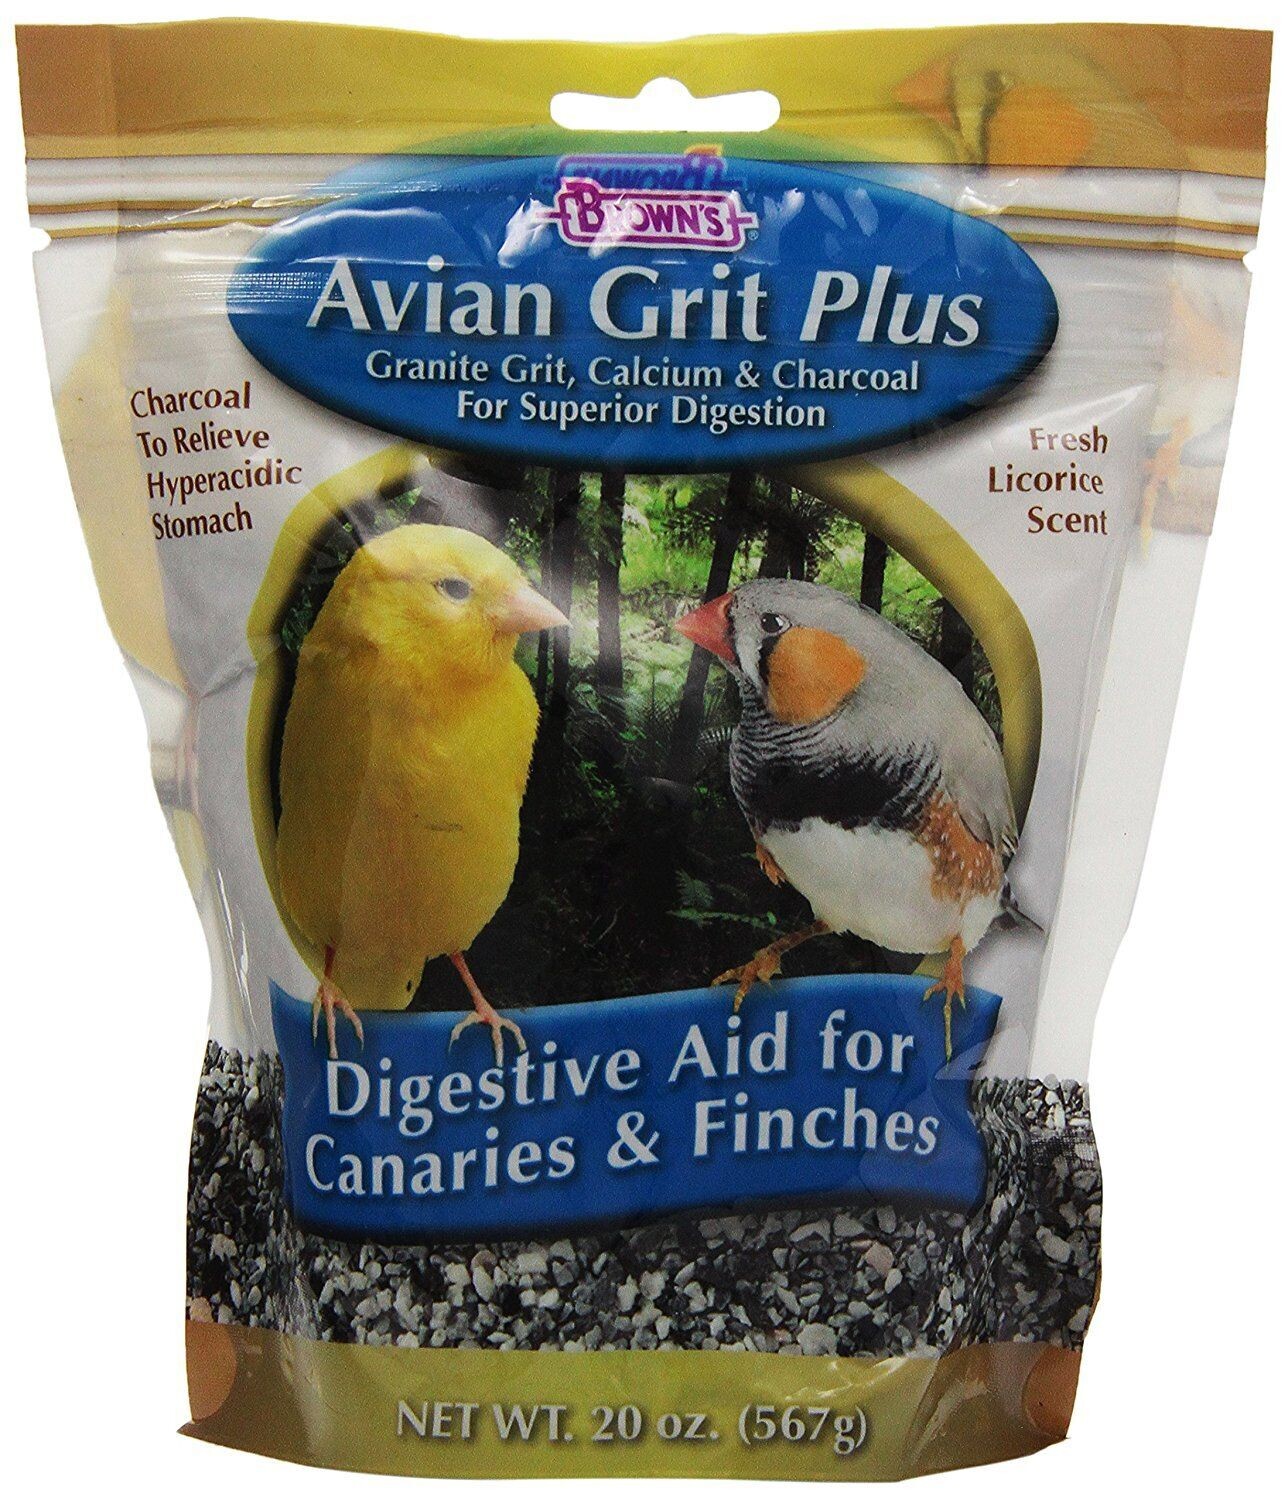 Brown's Avian Grit Plus Digestive Aid for Finches and Canaries with Licorice Scent, 20-Ounce